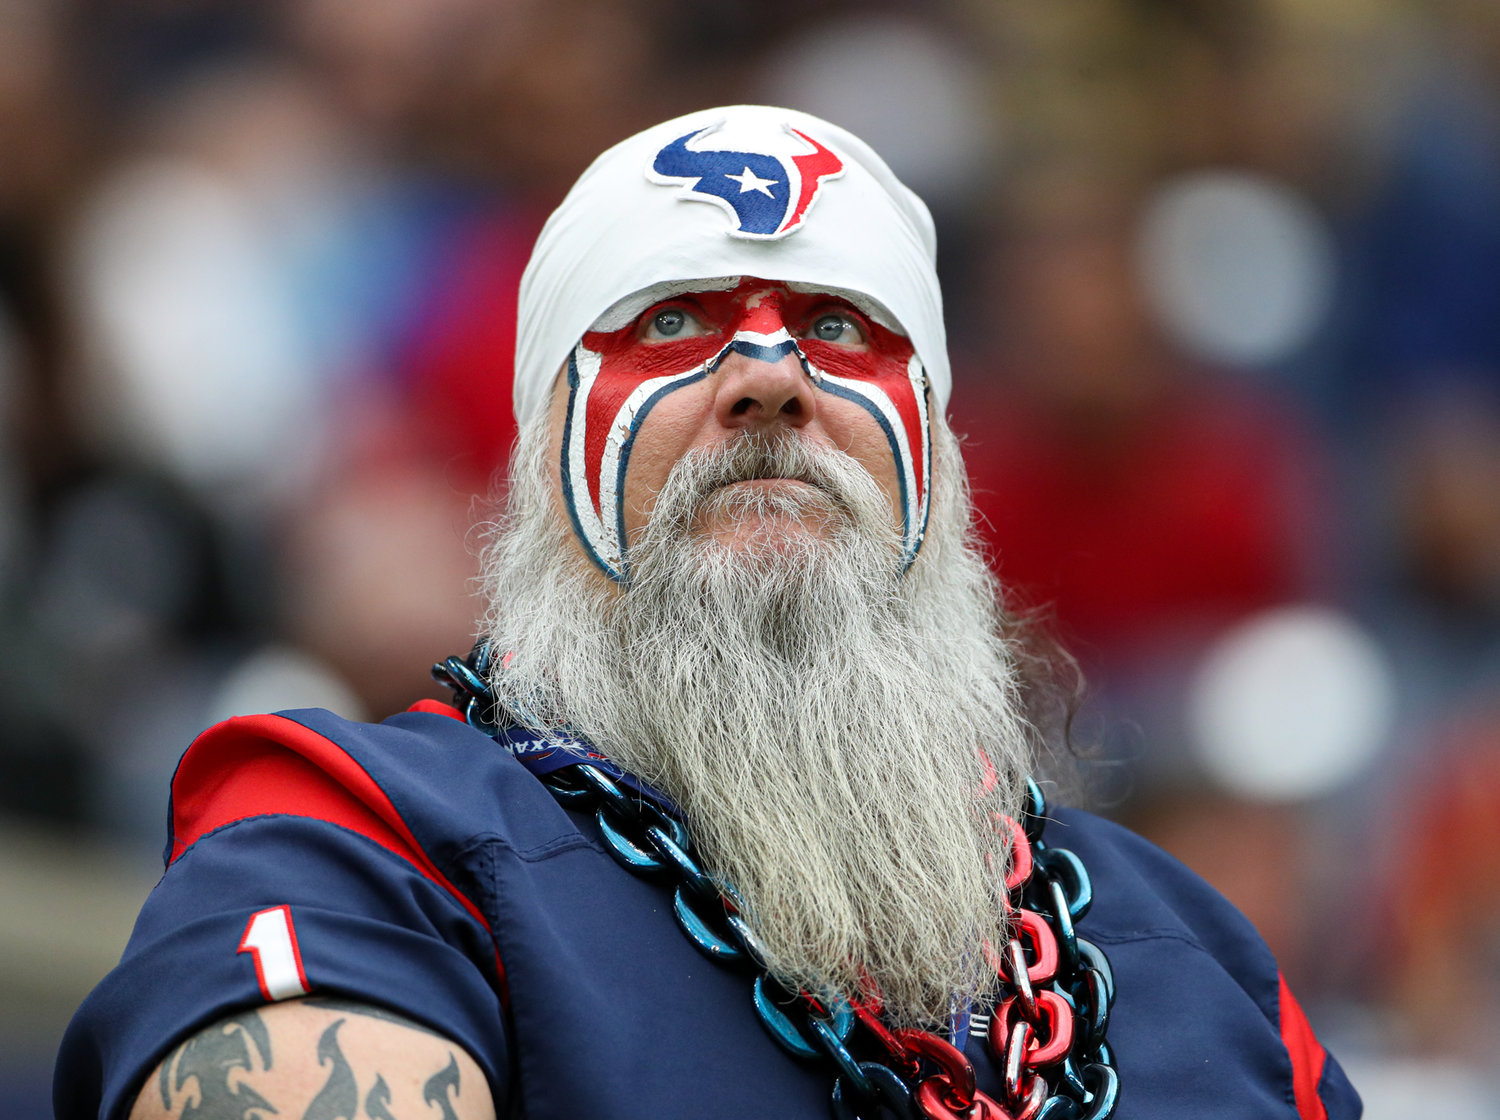 A Houston Texans fan watches the video board during an NFL game between Houston and the Los Angeles Rams on October 31, 2021 in Houston, Texas.